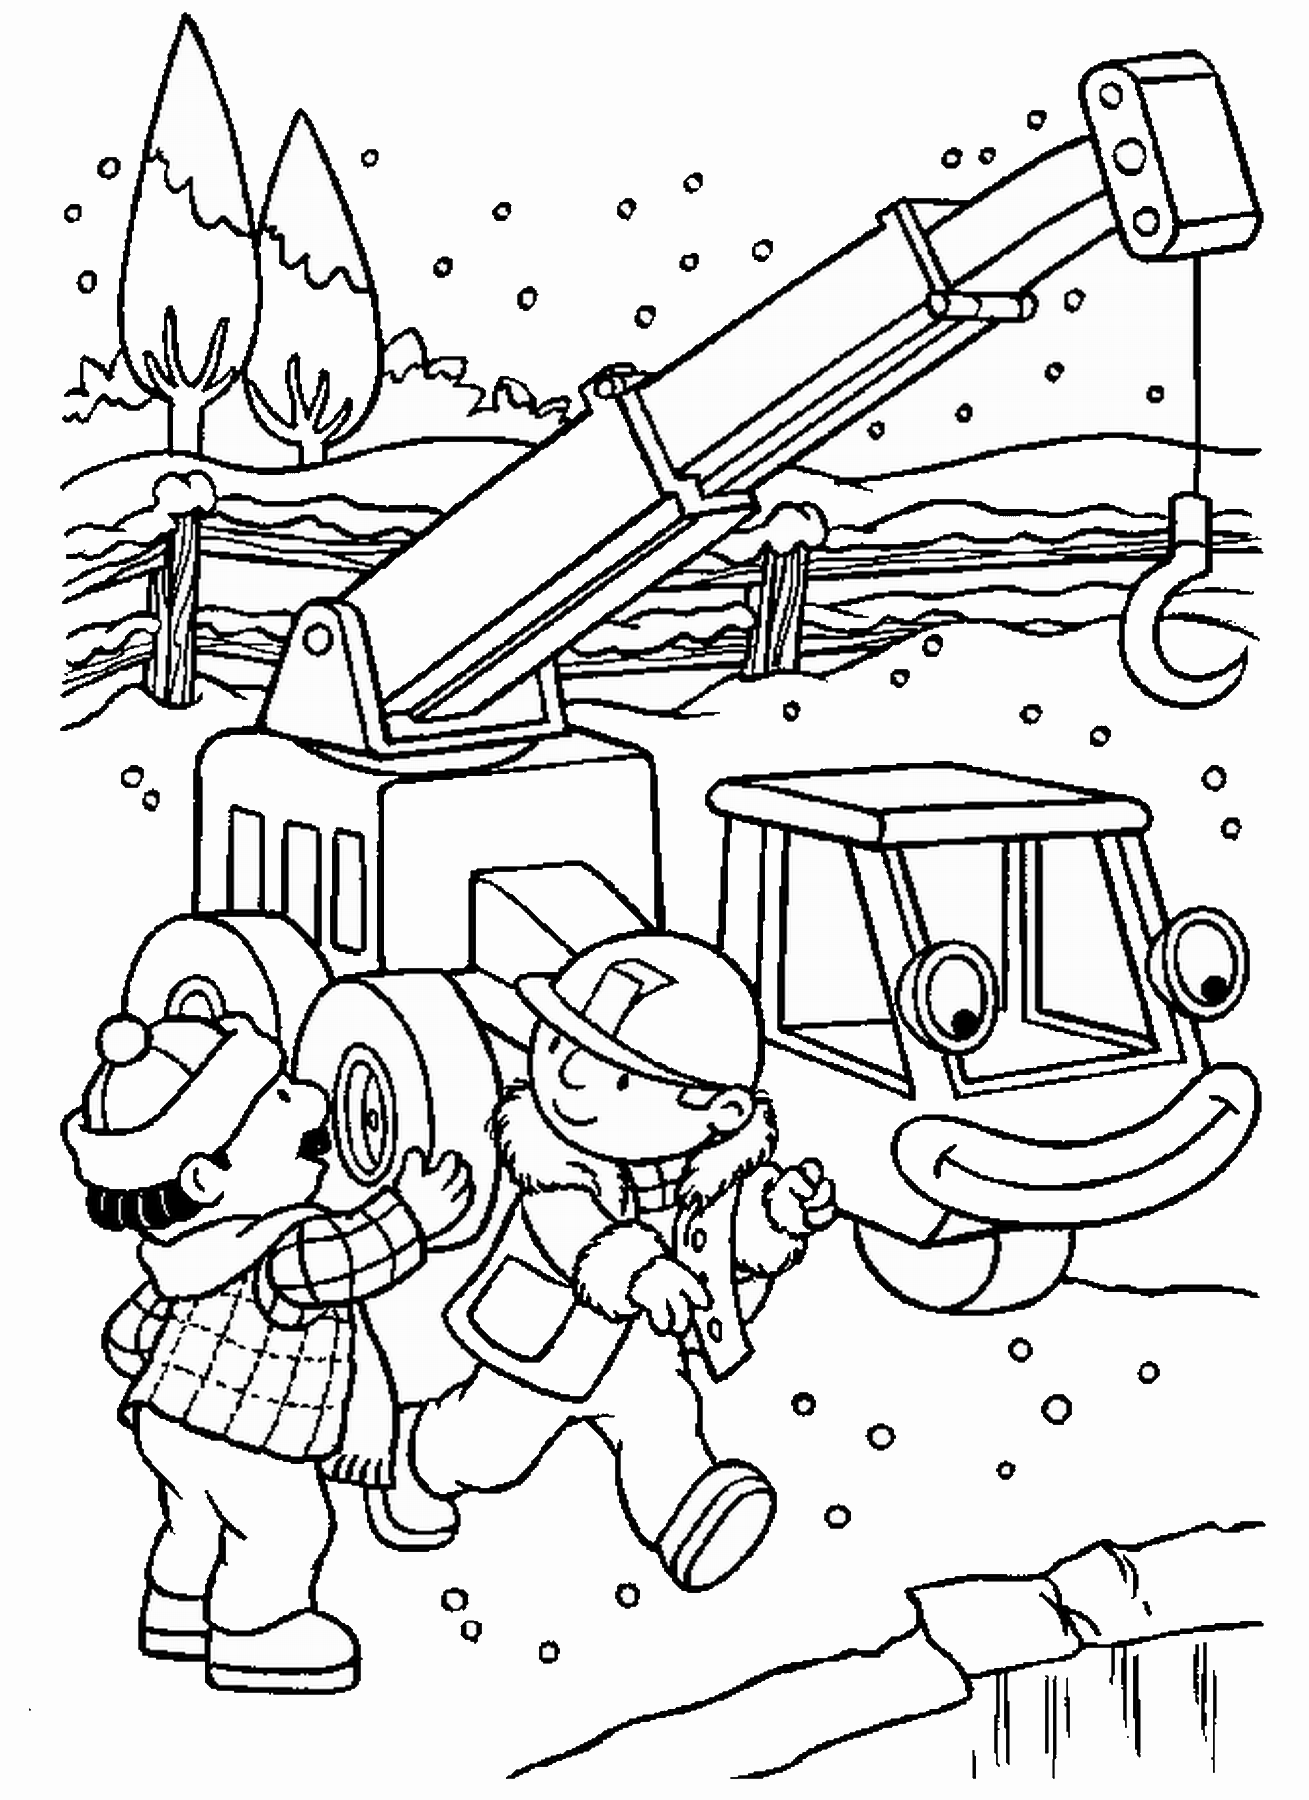 Bob the Builder Coloring Pages TV Film bob the builder_30 Printable 2020 00980 Coloring4free